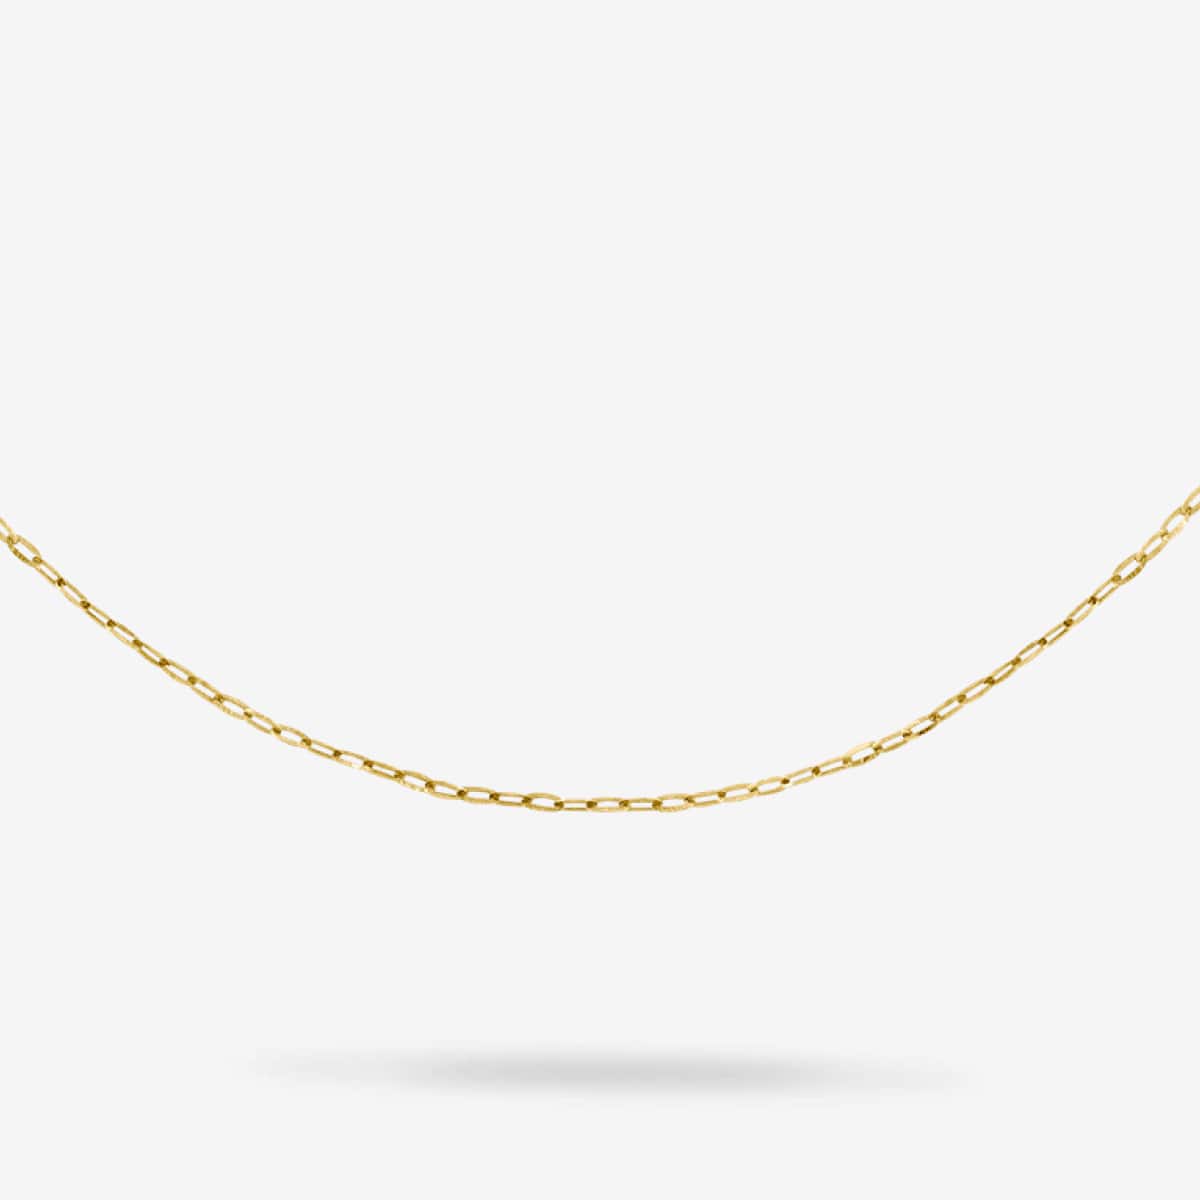 Womens Golden Geometric Layered Chain Necklace (Gold)